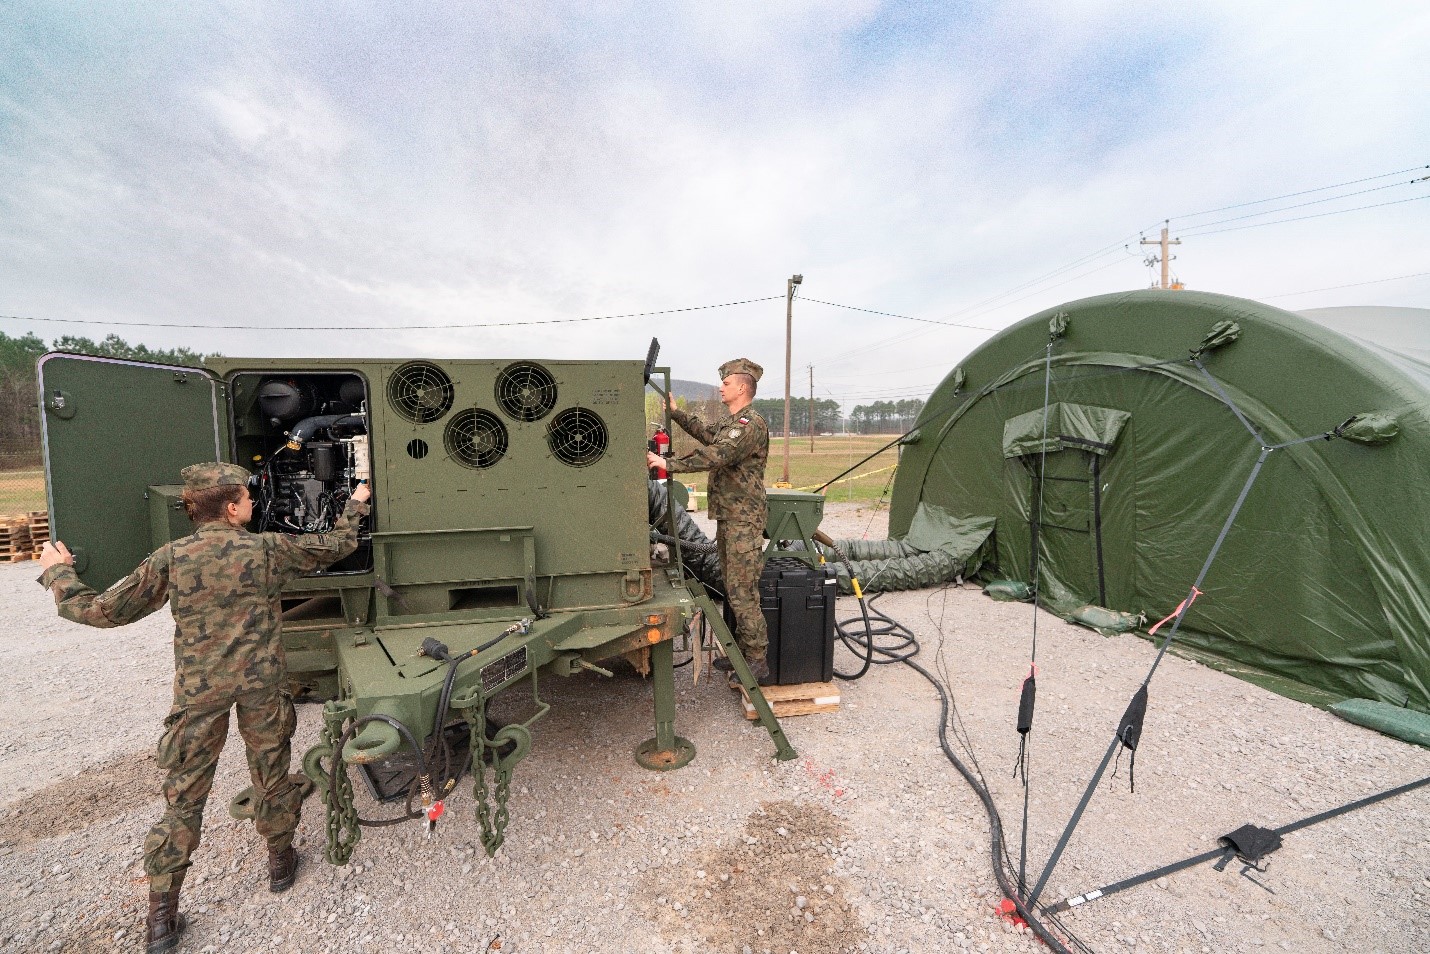 Polish soldiers prepare for IBCS training at Redstone Arsenal, Alabama. Northrop Grumman’s Air Defense Reconfigurable Trainer provides the infrastructure to teach soldiers how to use IBCS in both group and self-paced training environments. (Photo Credit: U.S. Army)